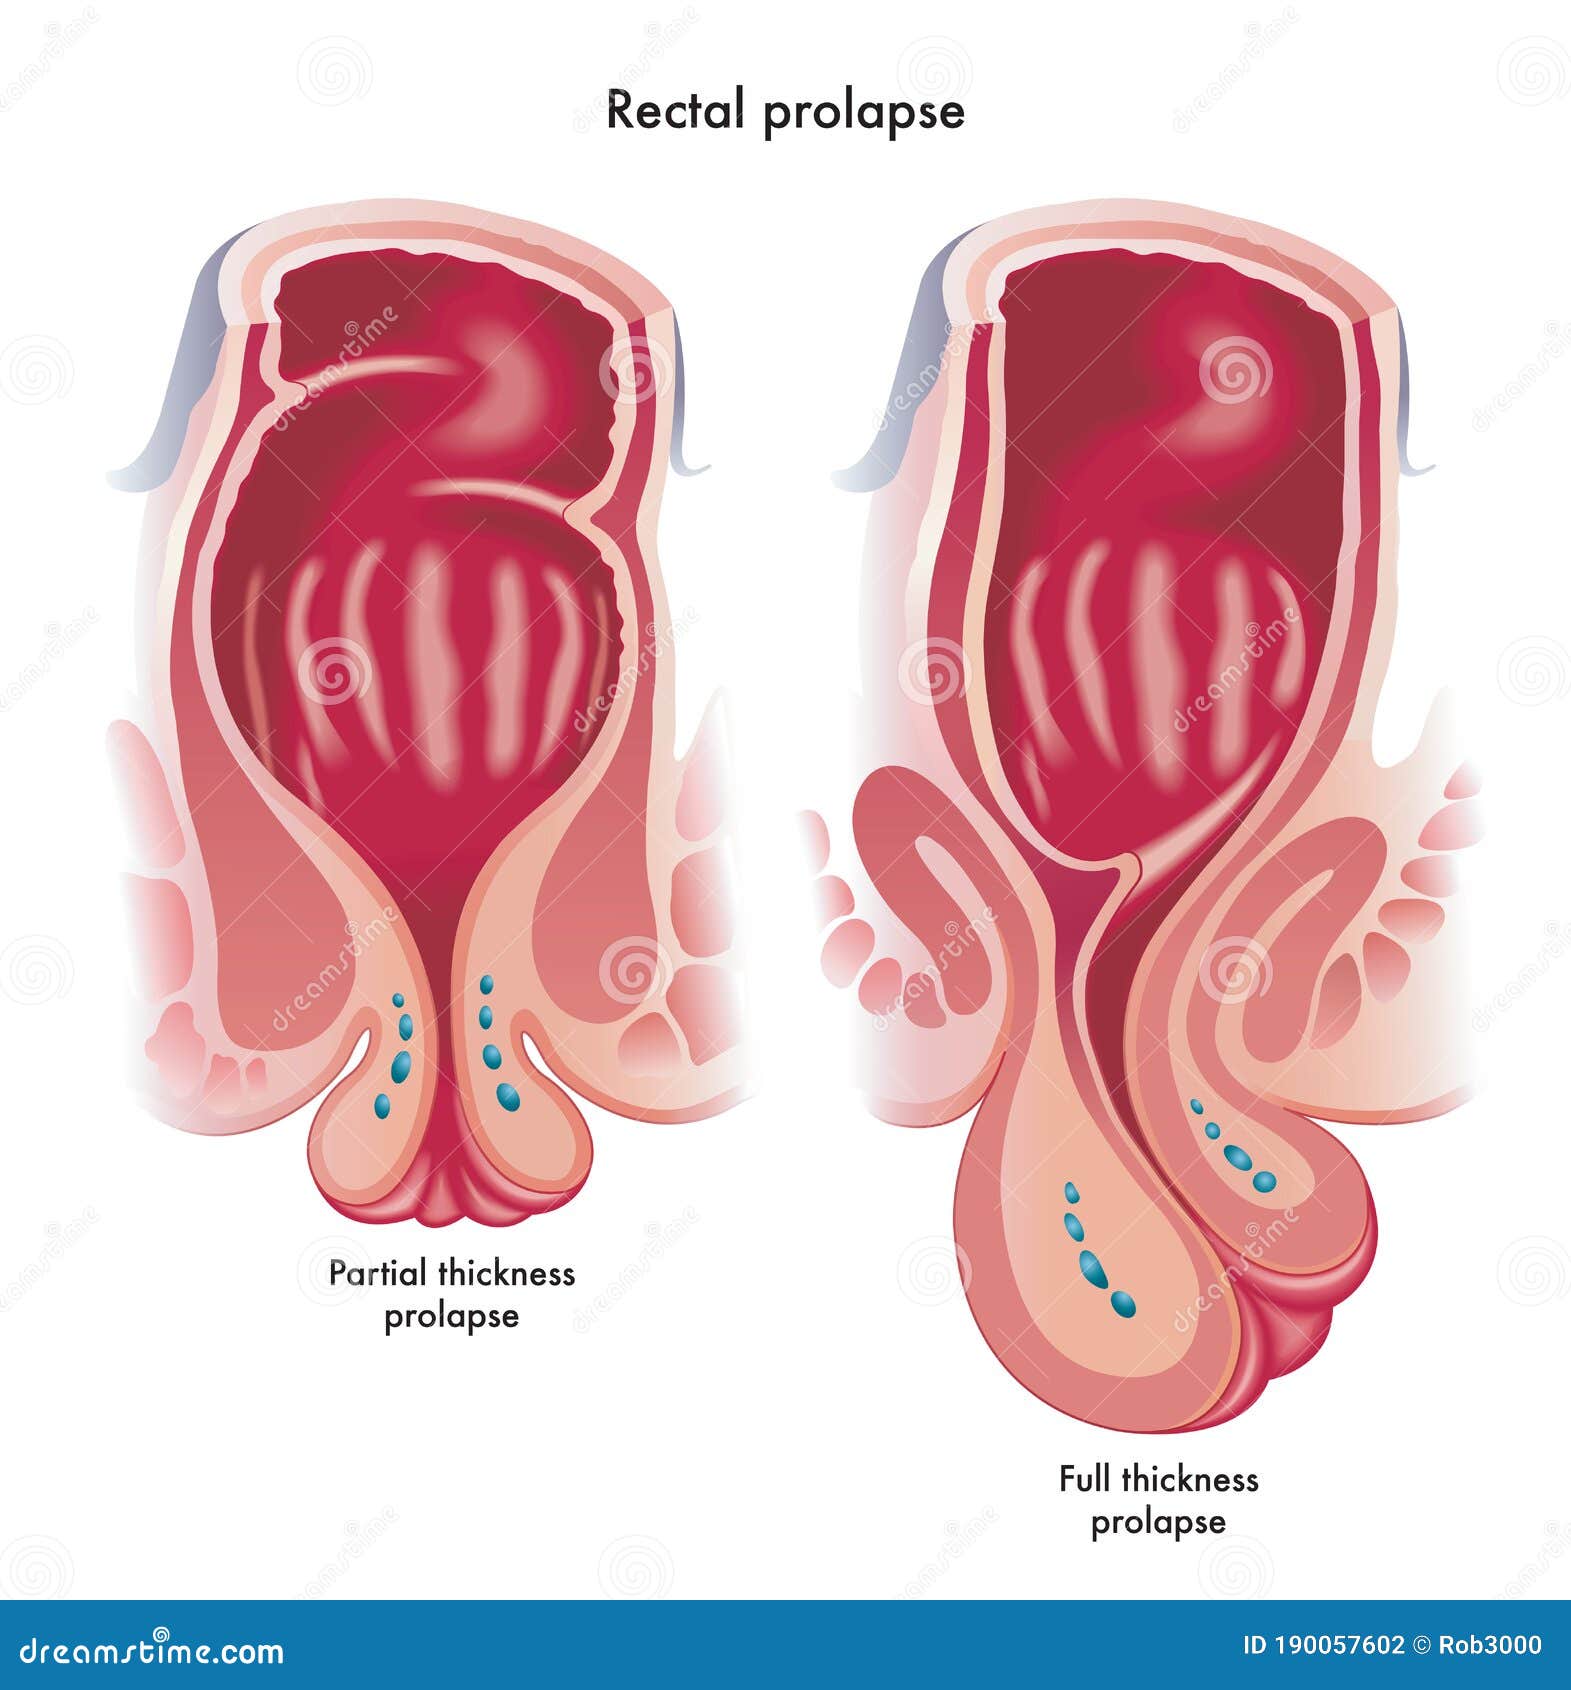 medical  showing two types of rectal prolapse